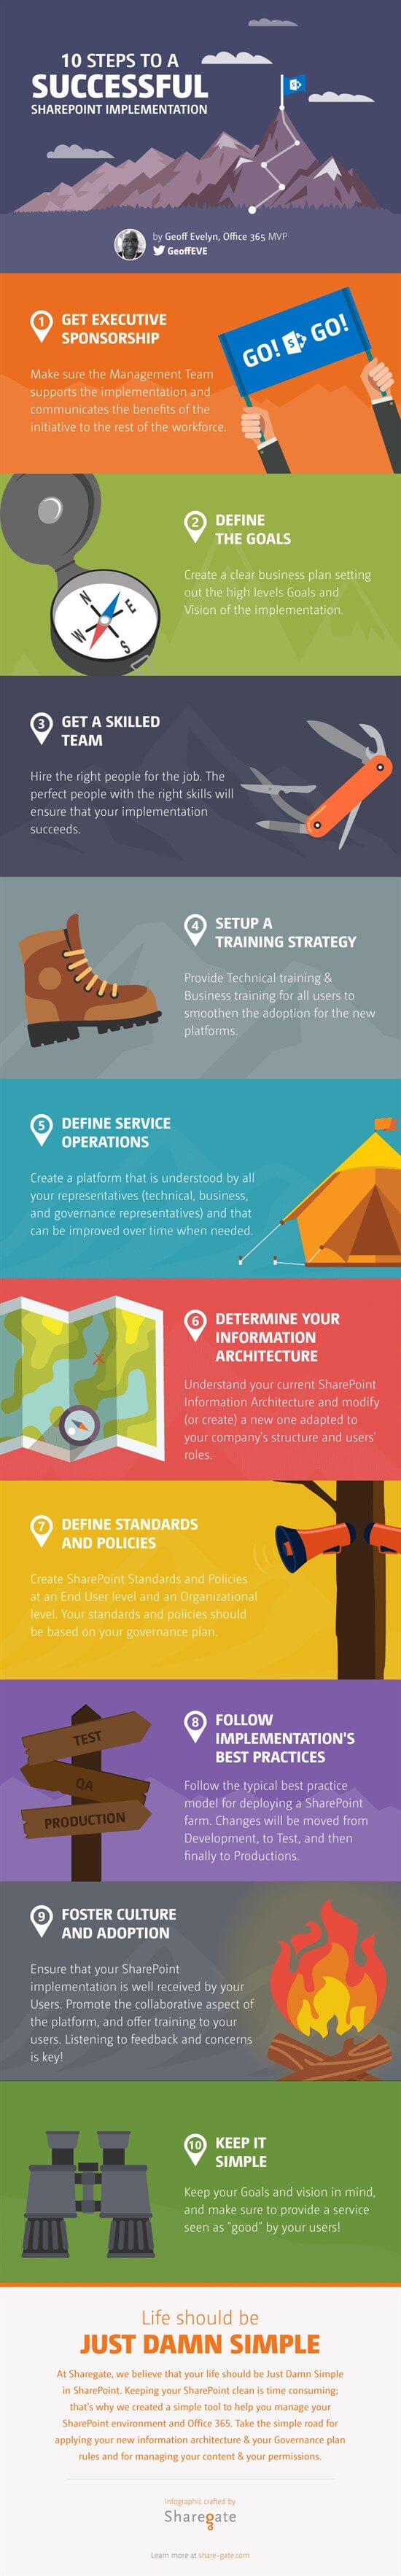 Infographic by ShareGate: 10 Steps to a Successful SharePoint Implementation